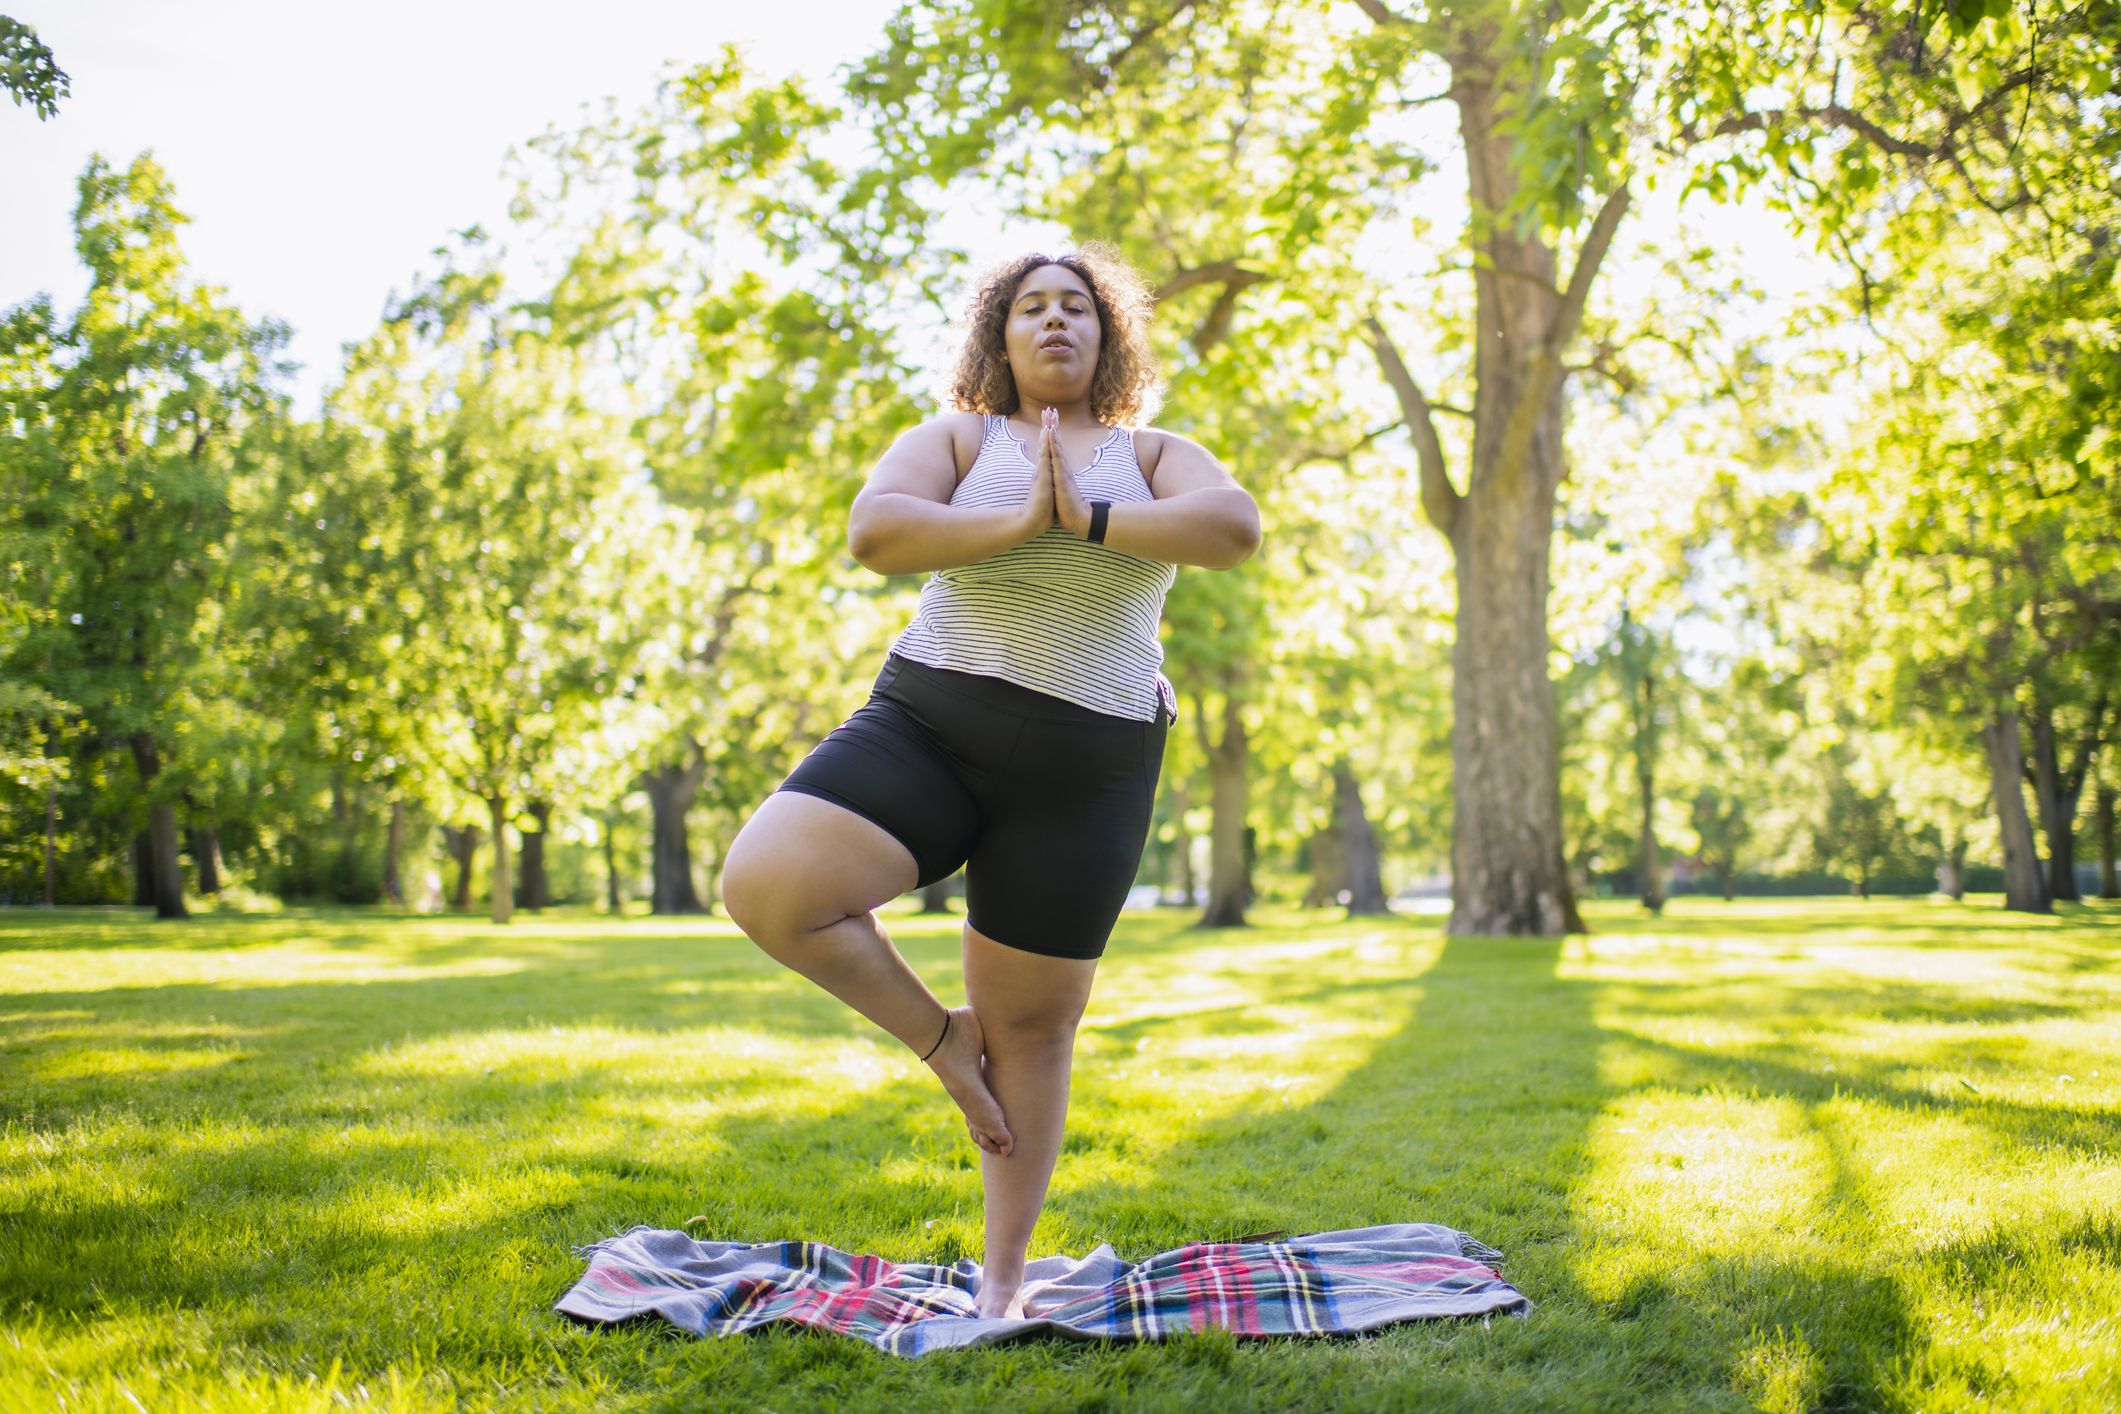 Yoga for Arthritis | Practicing yoga just two or three times a week can  improve pain, physical fitness, and mood. Sometimes people living with  arthritis can feel intimidated... | By Johns Hopkins